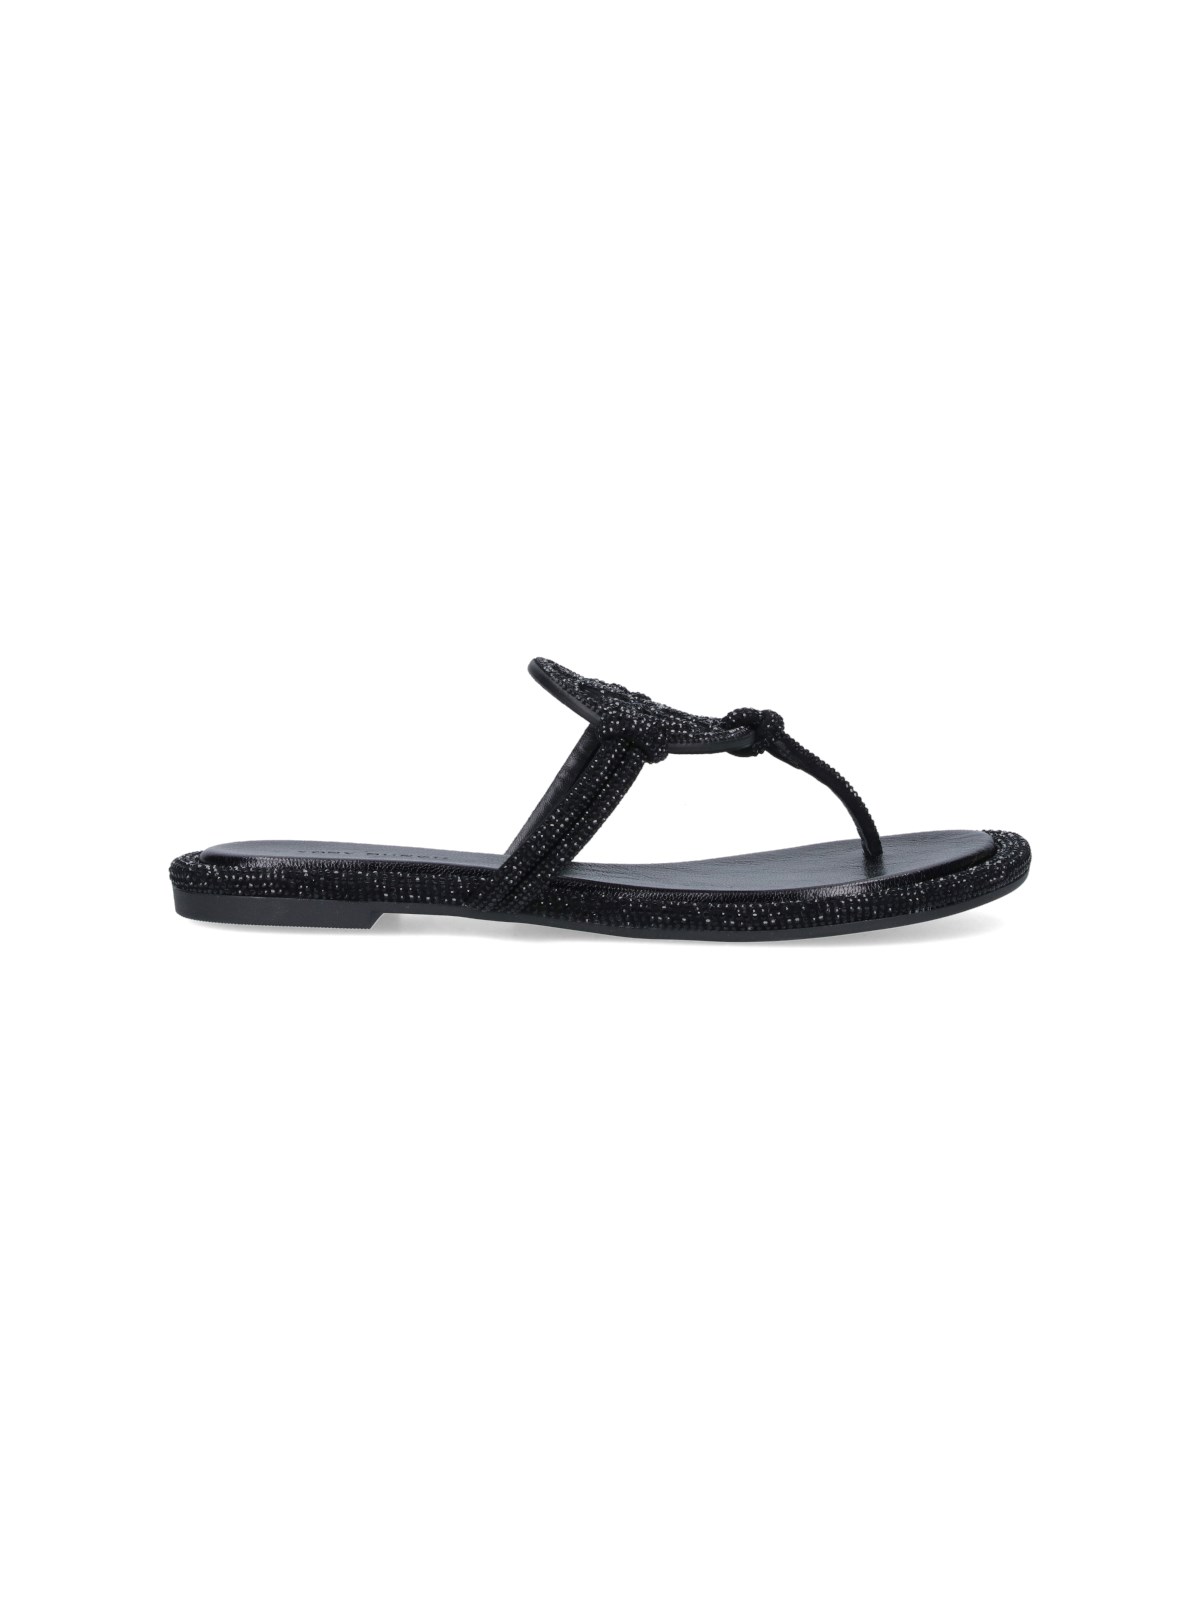 Tory Burch 'miller' Thong Sandals In Black  